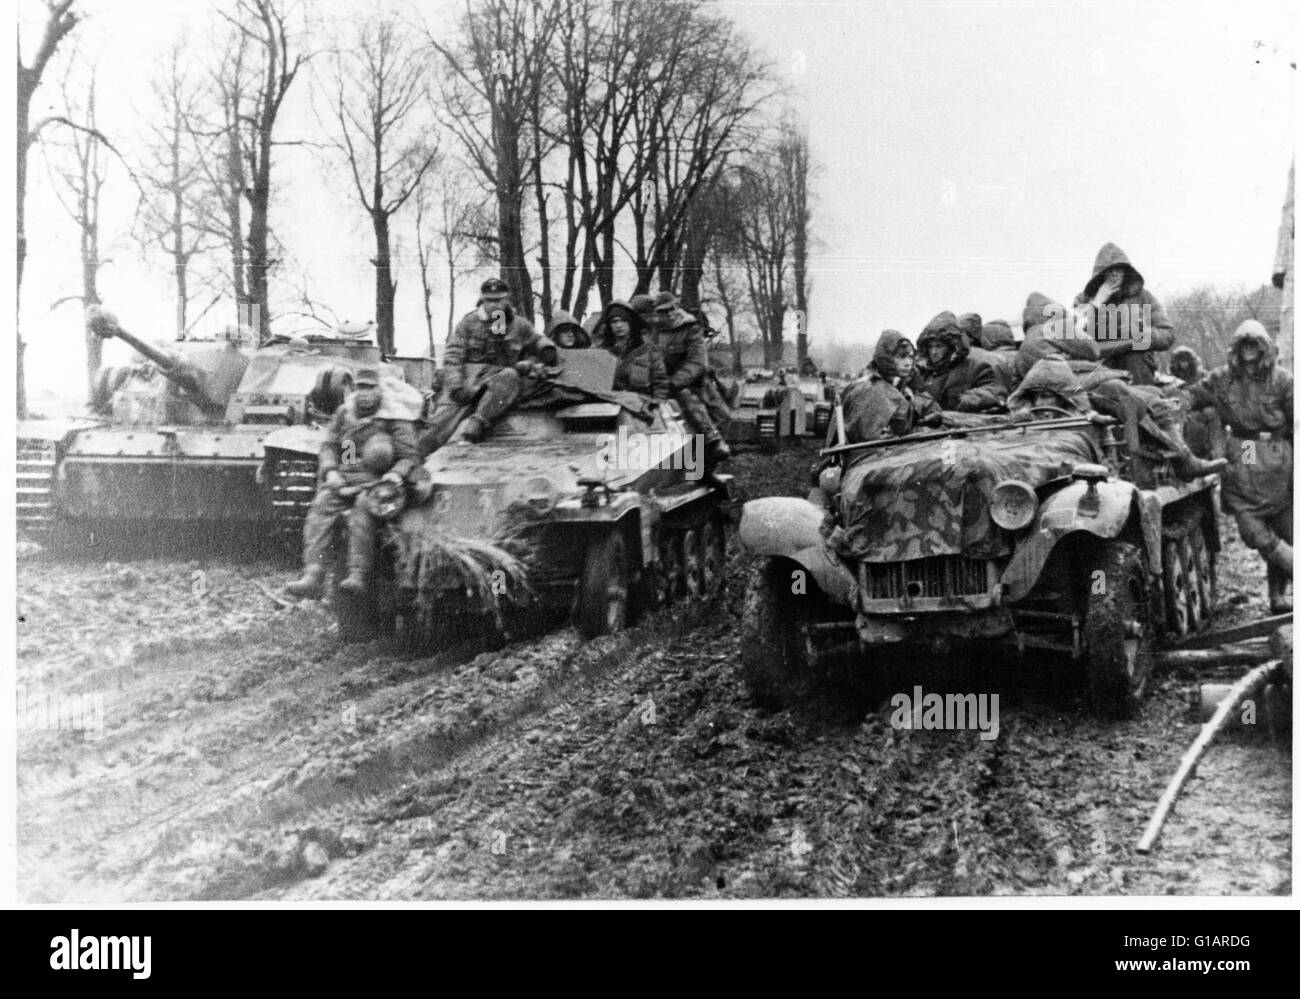 Waffen SS Tanks Panzer Troops 1st SS Panzer Division LSSAH prepare to advance against Russian forces Eastern Front Hungary 1945 Stock Photo